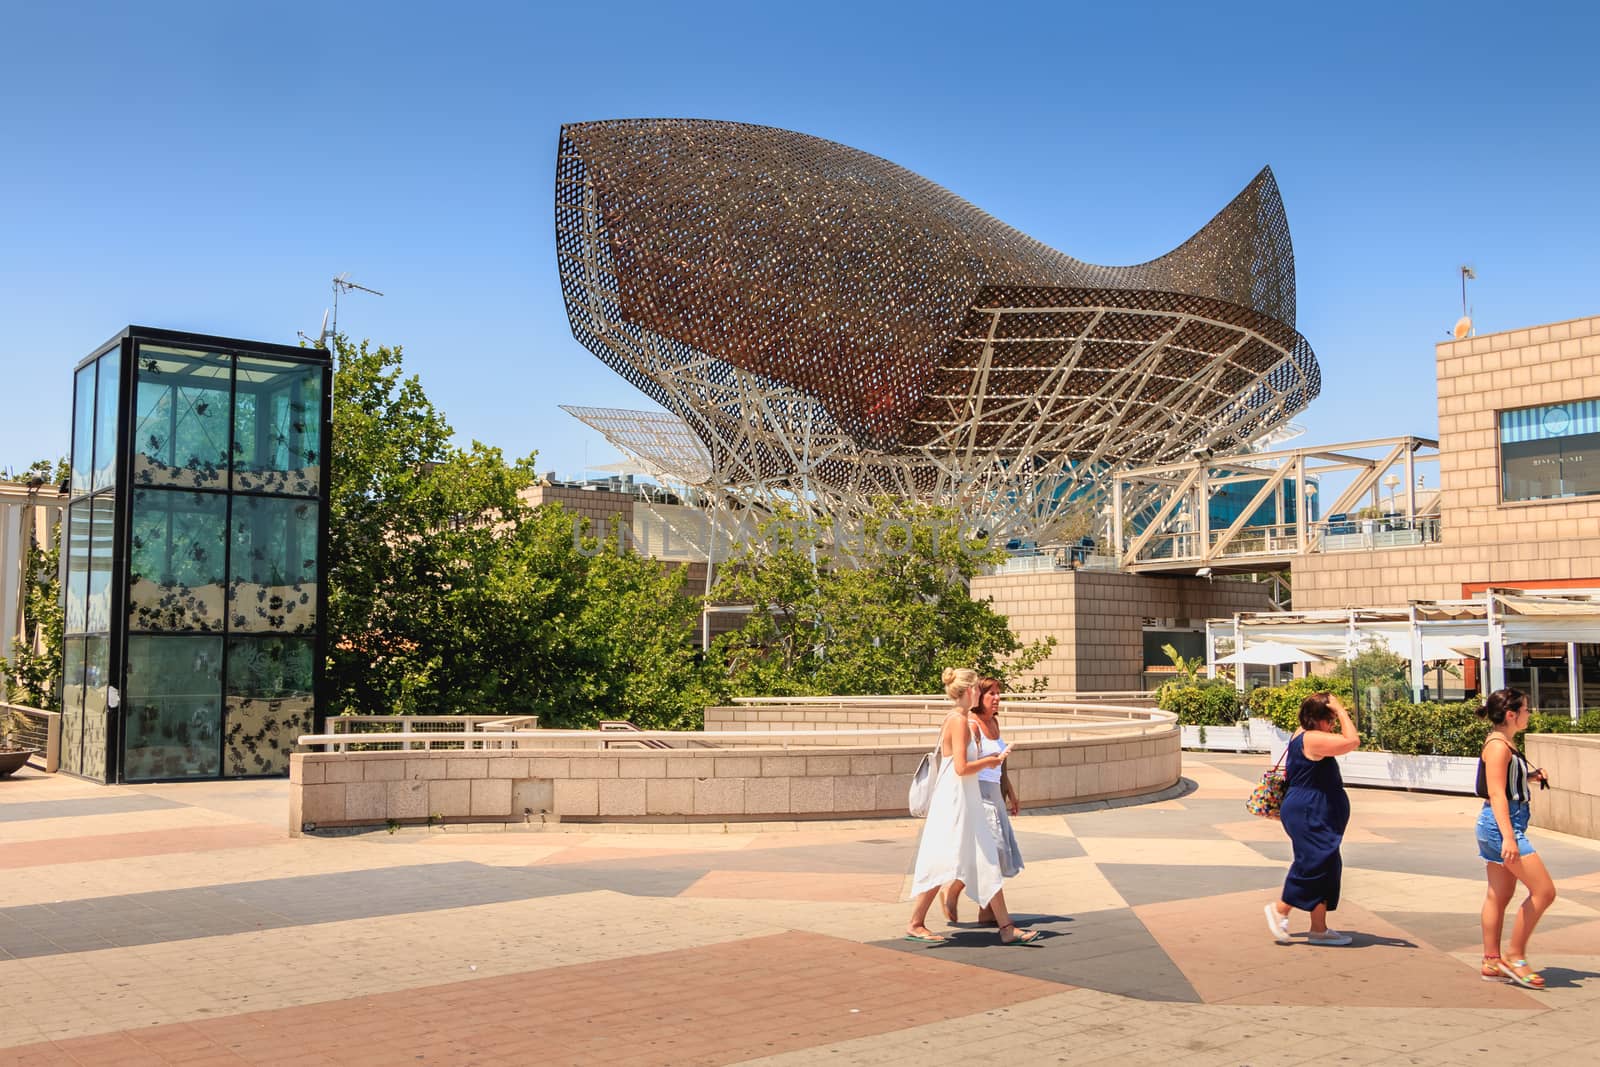 Barcelona, Spain - June 21, 2017 : in the middle of the day, tourists stroll in front of the fish of the American architect Frank Gehry built on the occasion of the 1992 summer Olympics